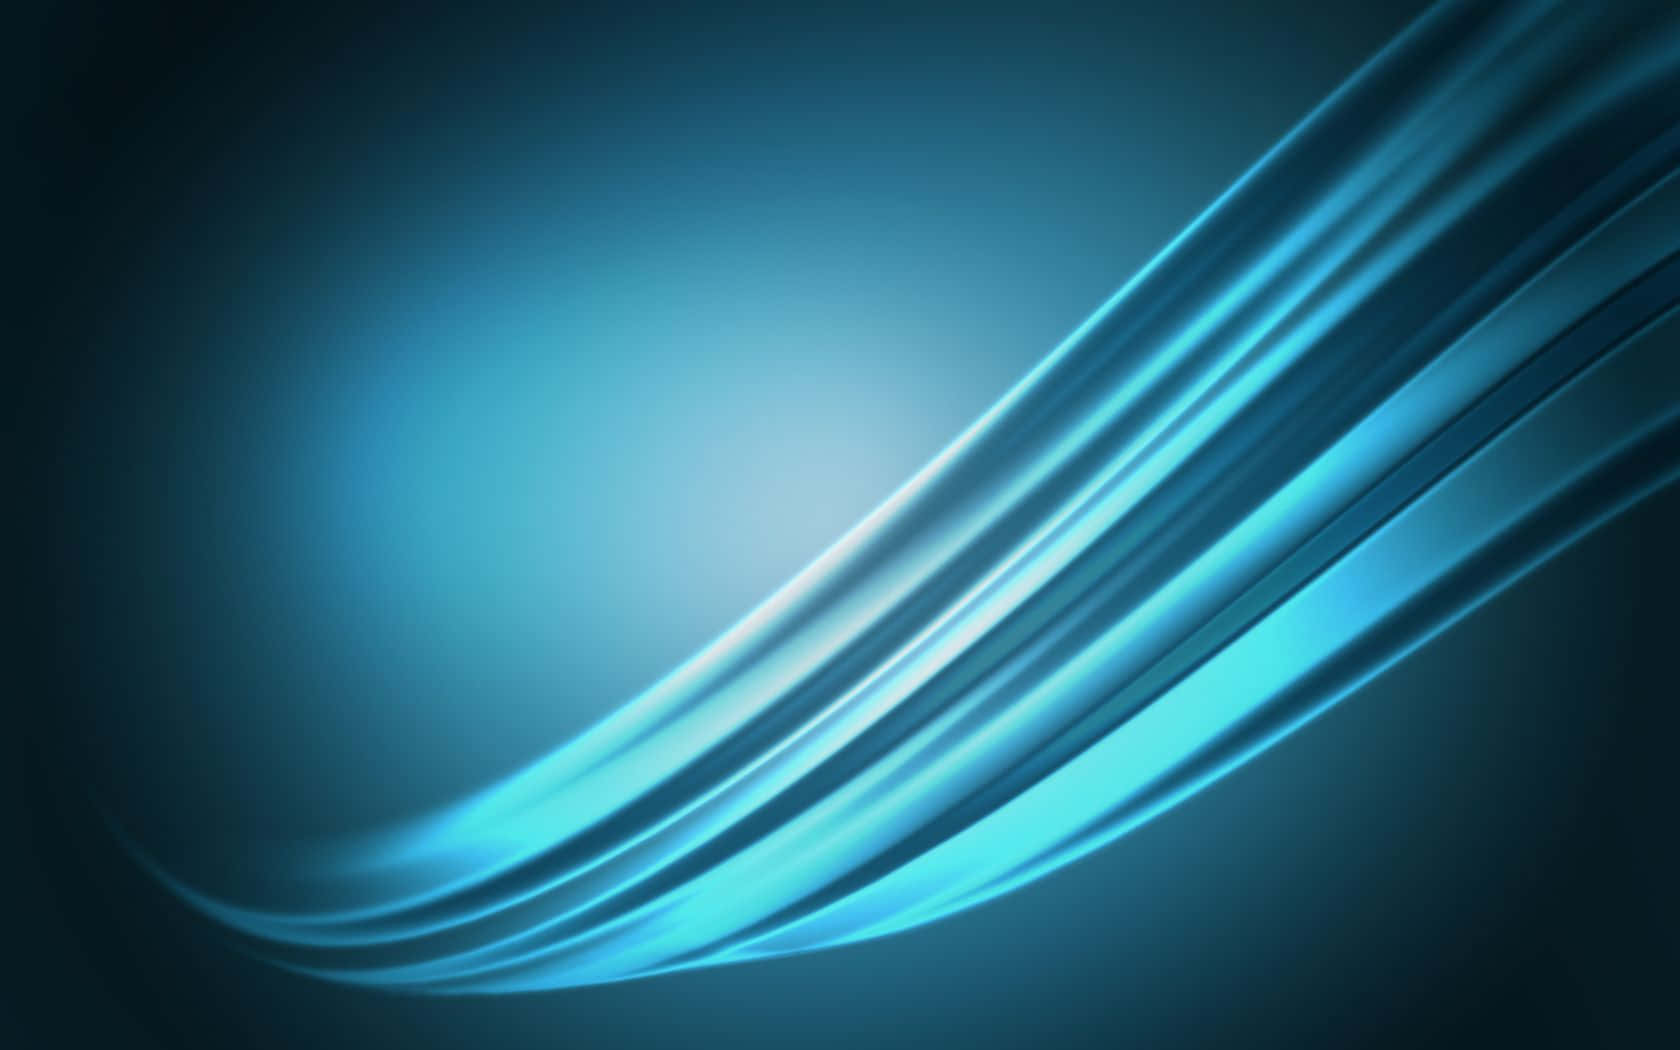 Download Powerpoint Presentation Background | Wallpapers.com